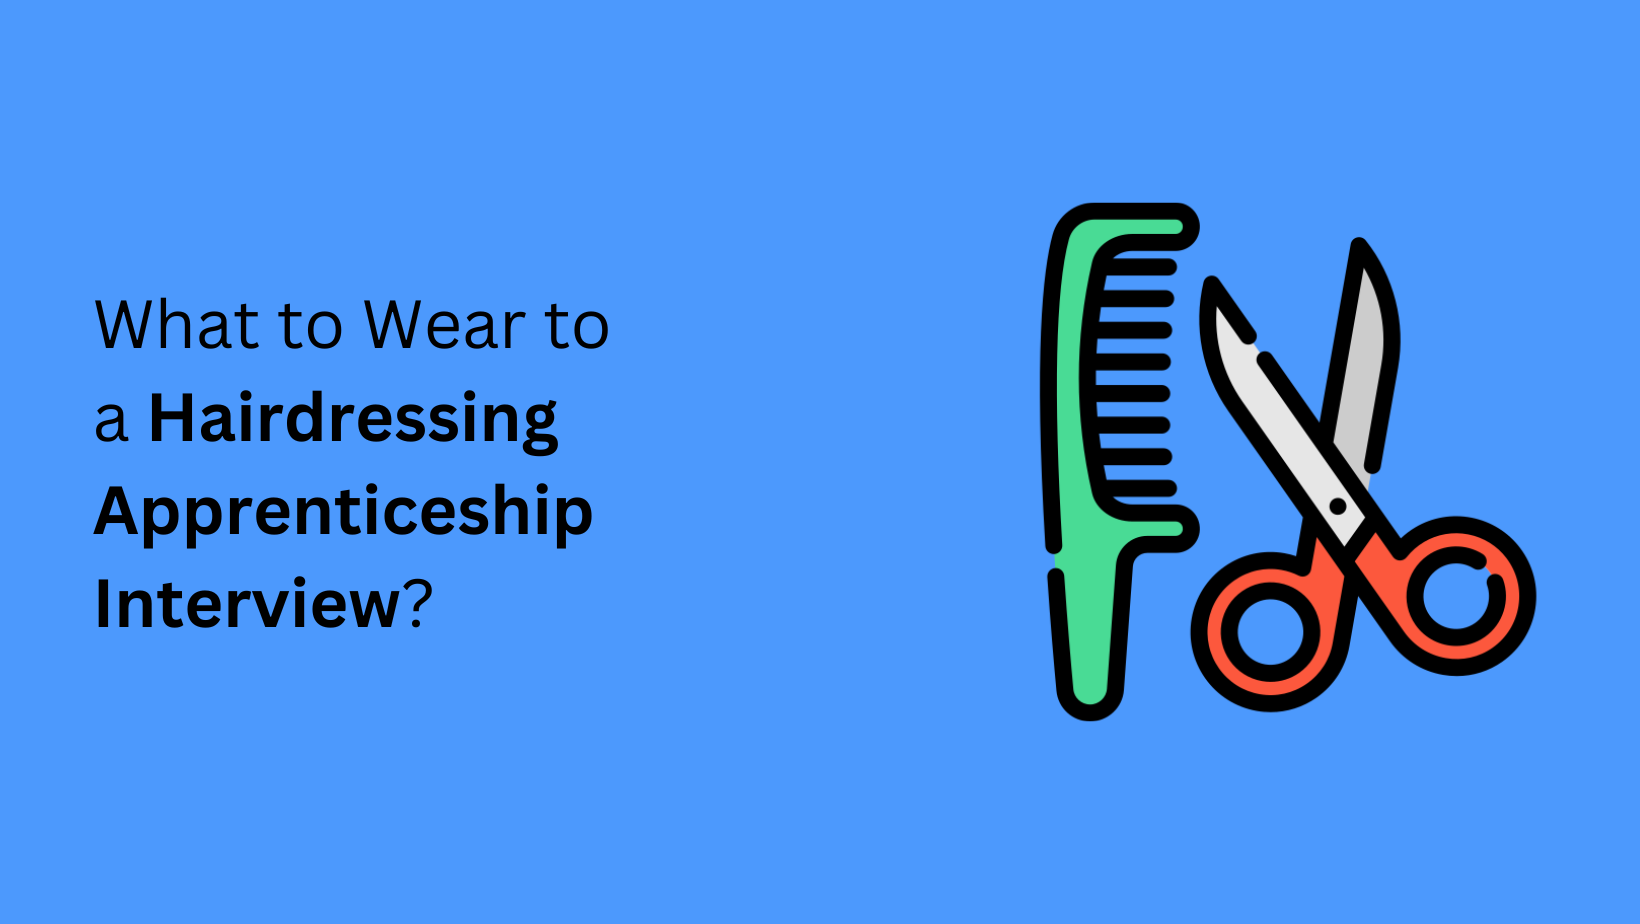 What to Wear to a Hairdressing Apprenticeship Interview